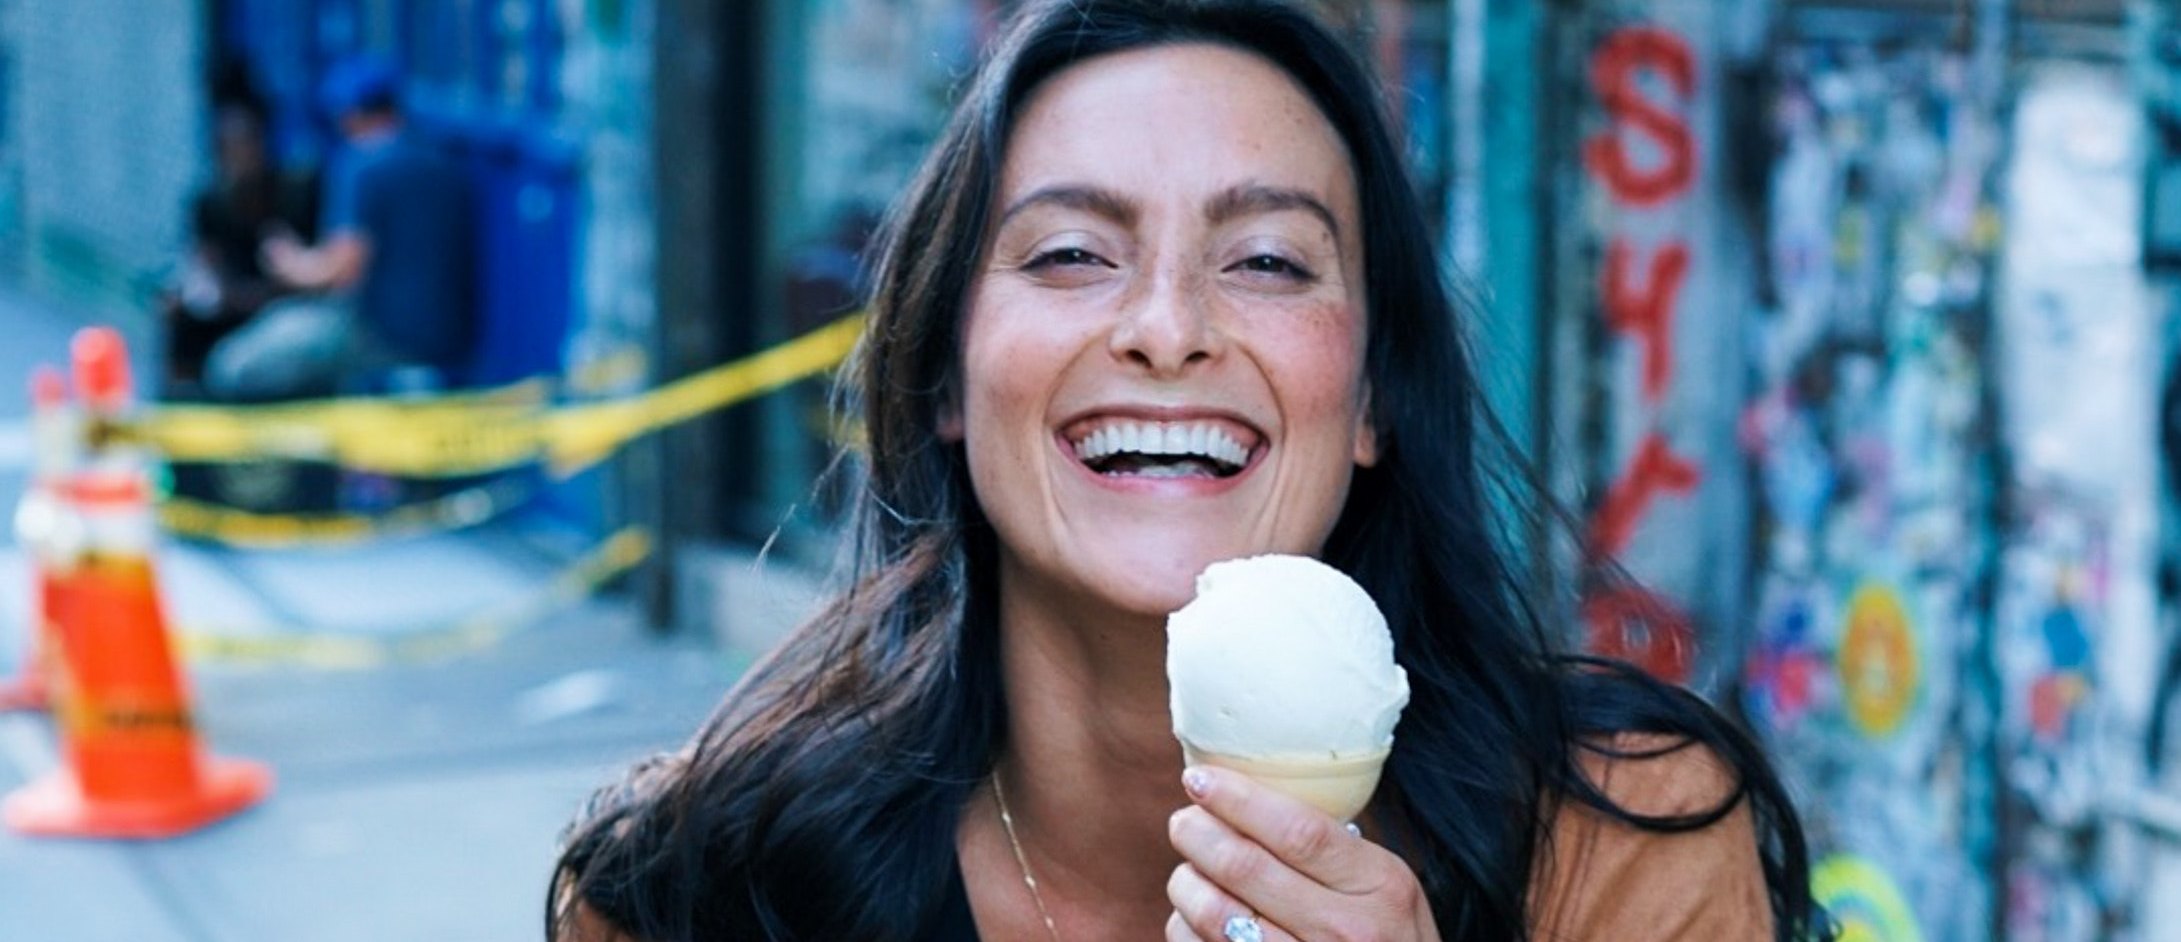 Young brunette woman smiling with ice cream